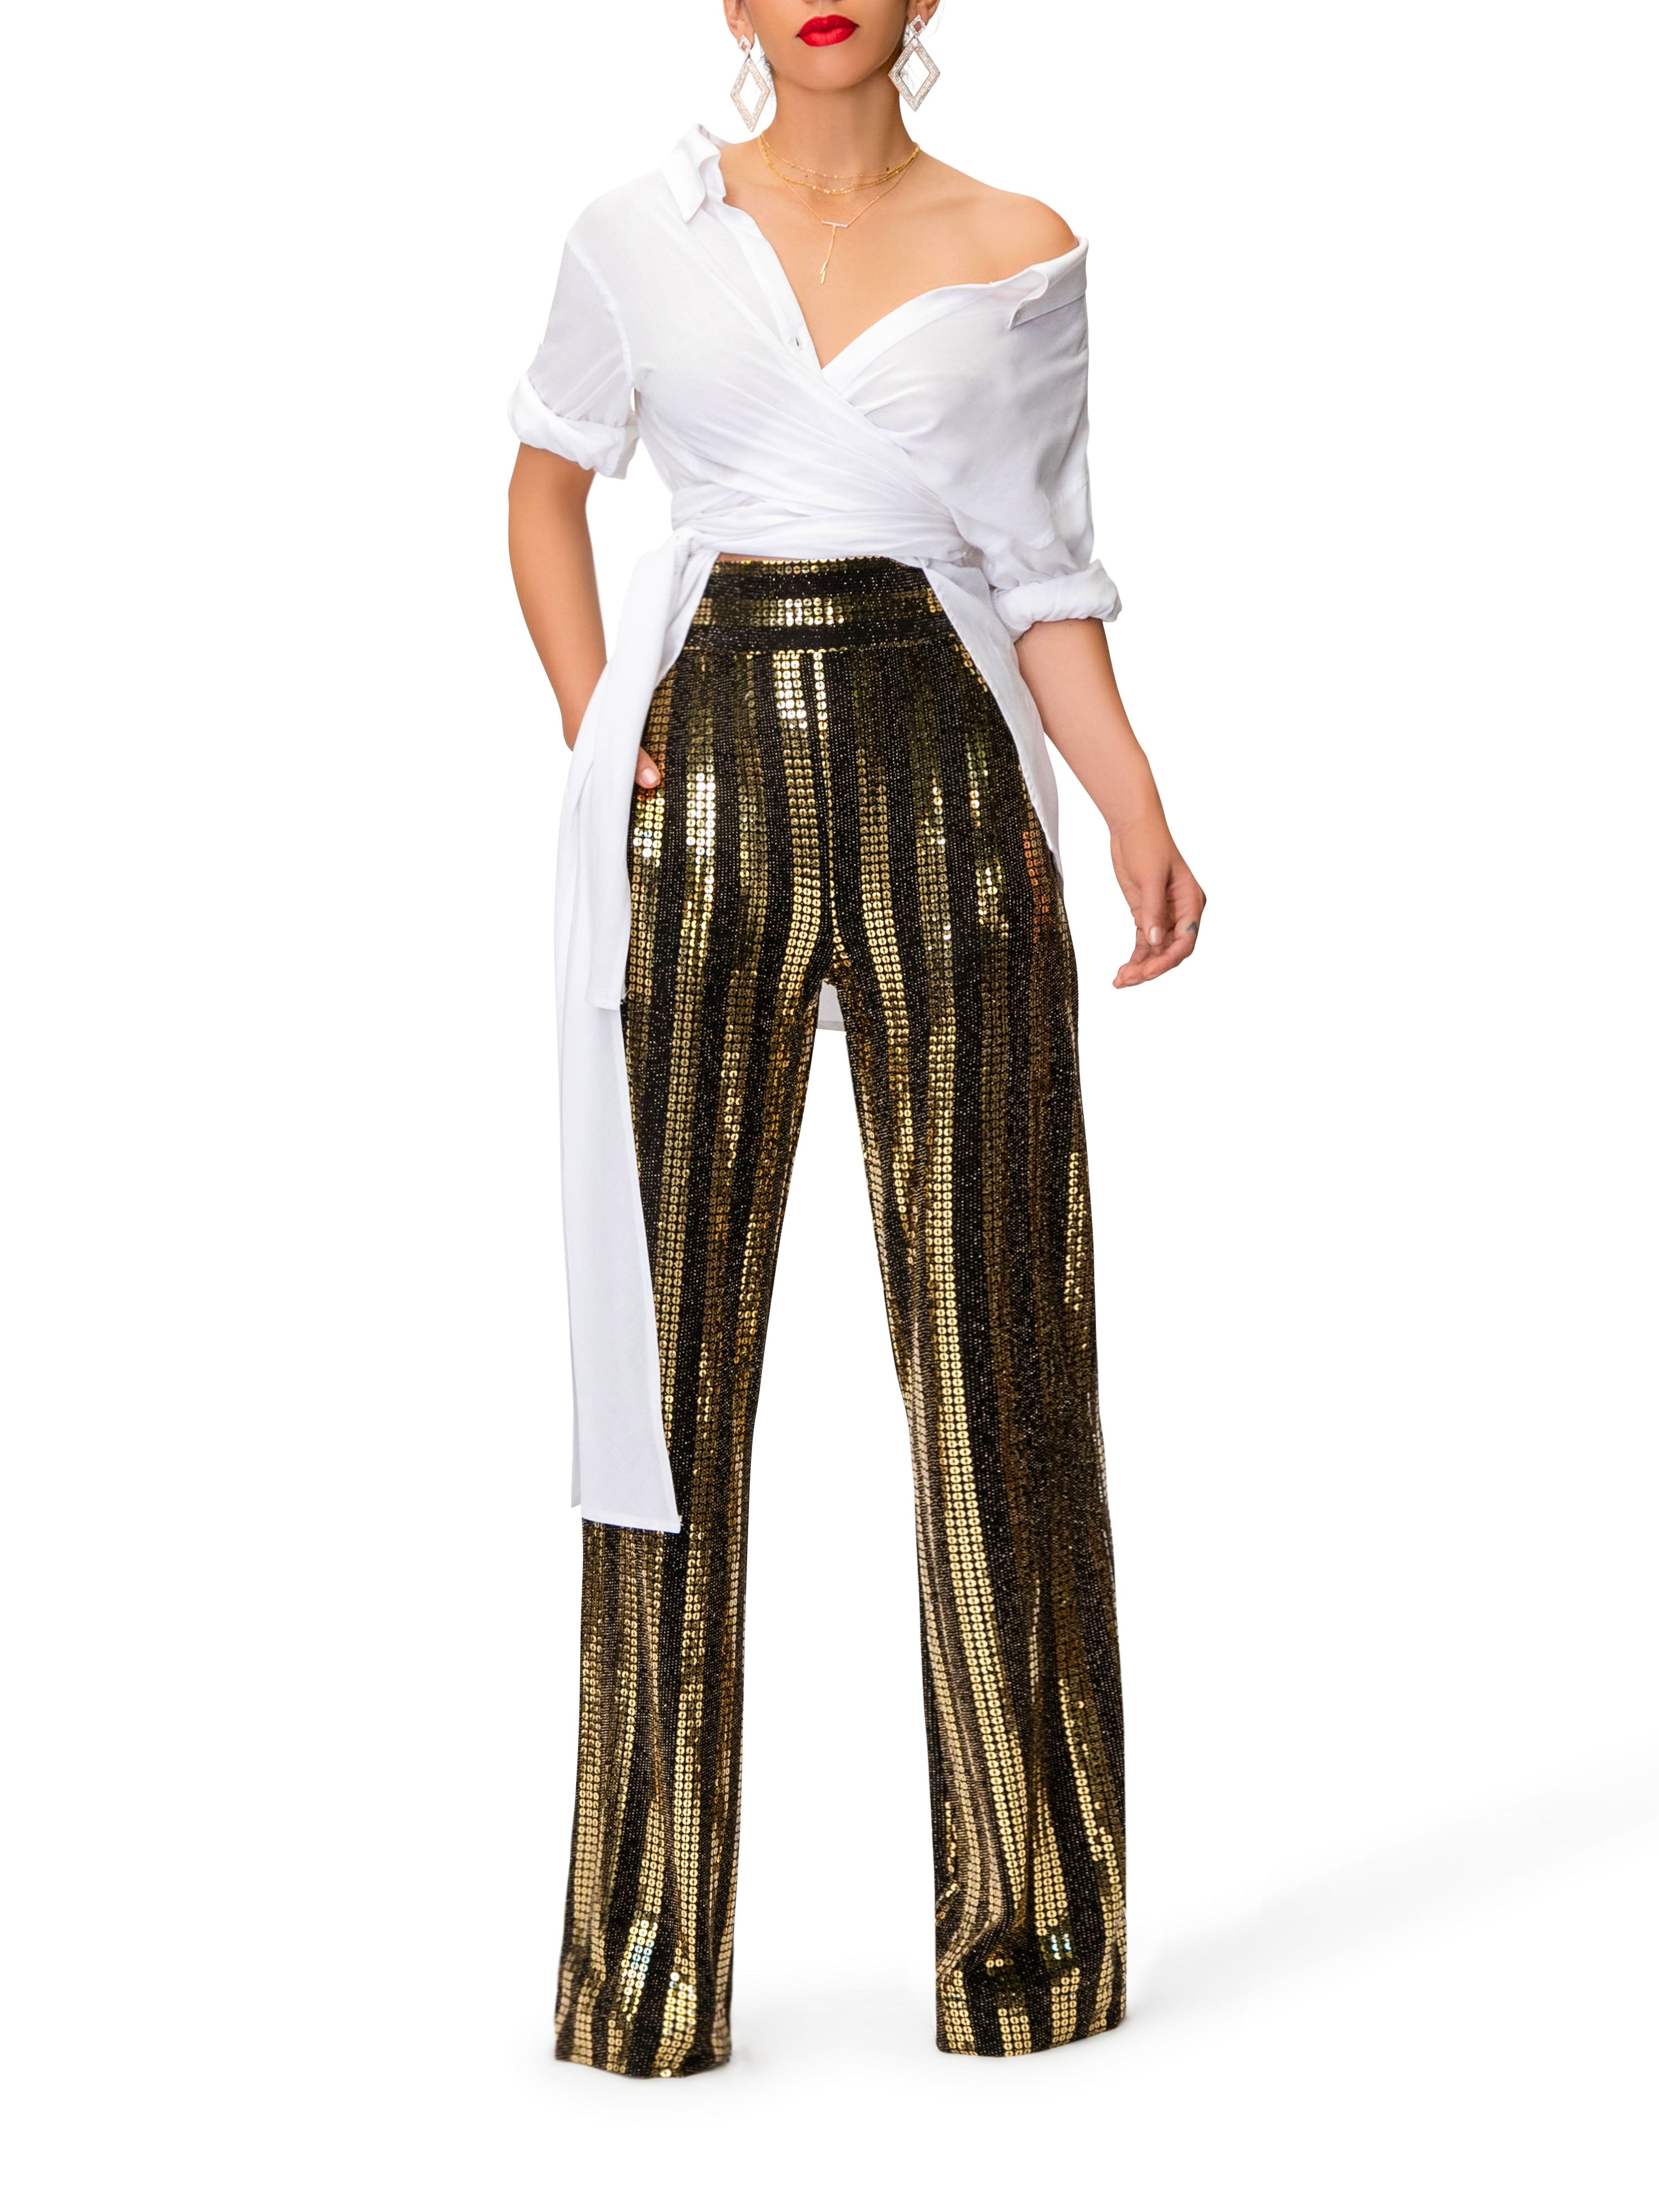 black and gold pants outfit